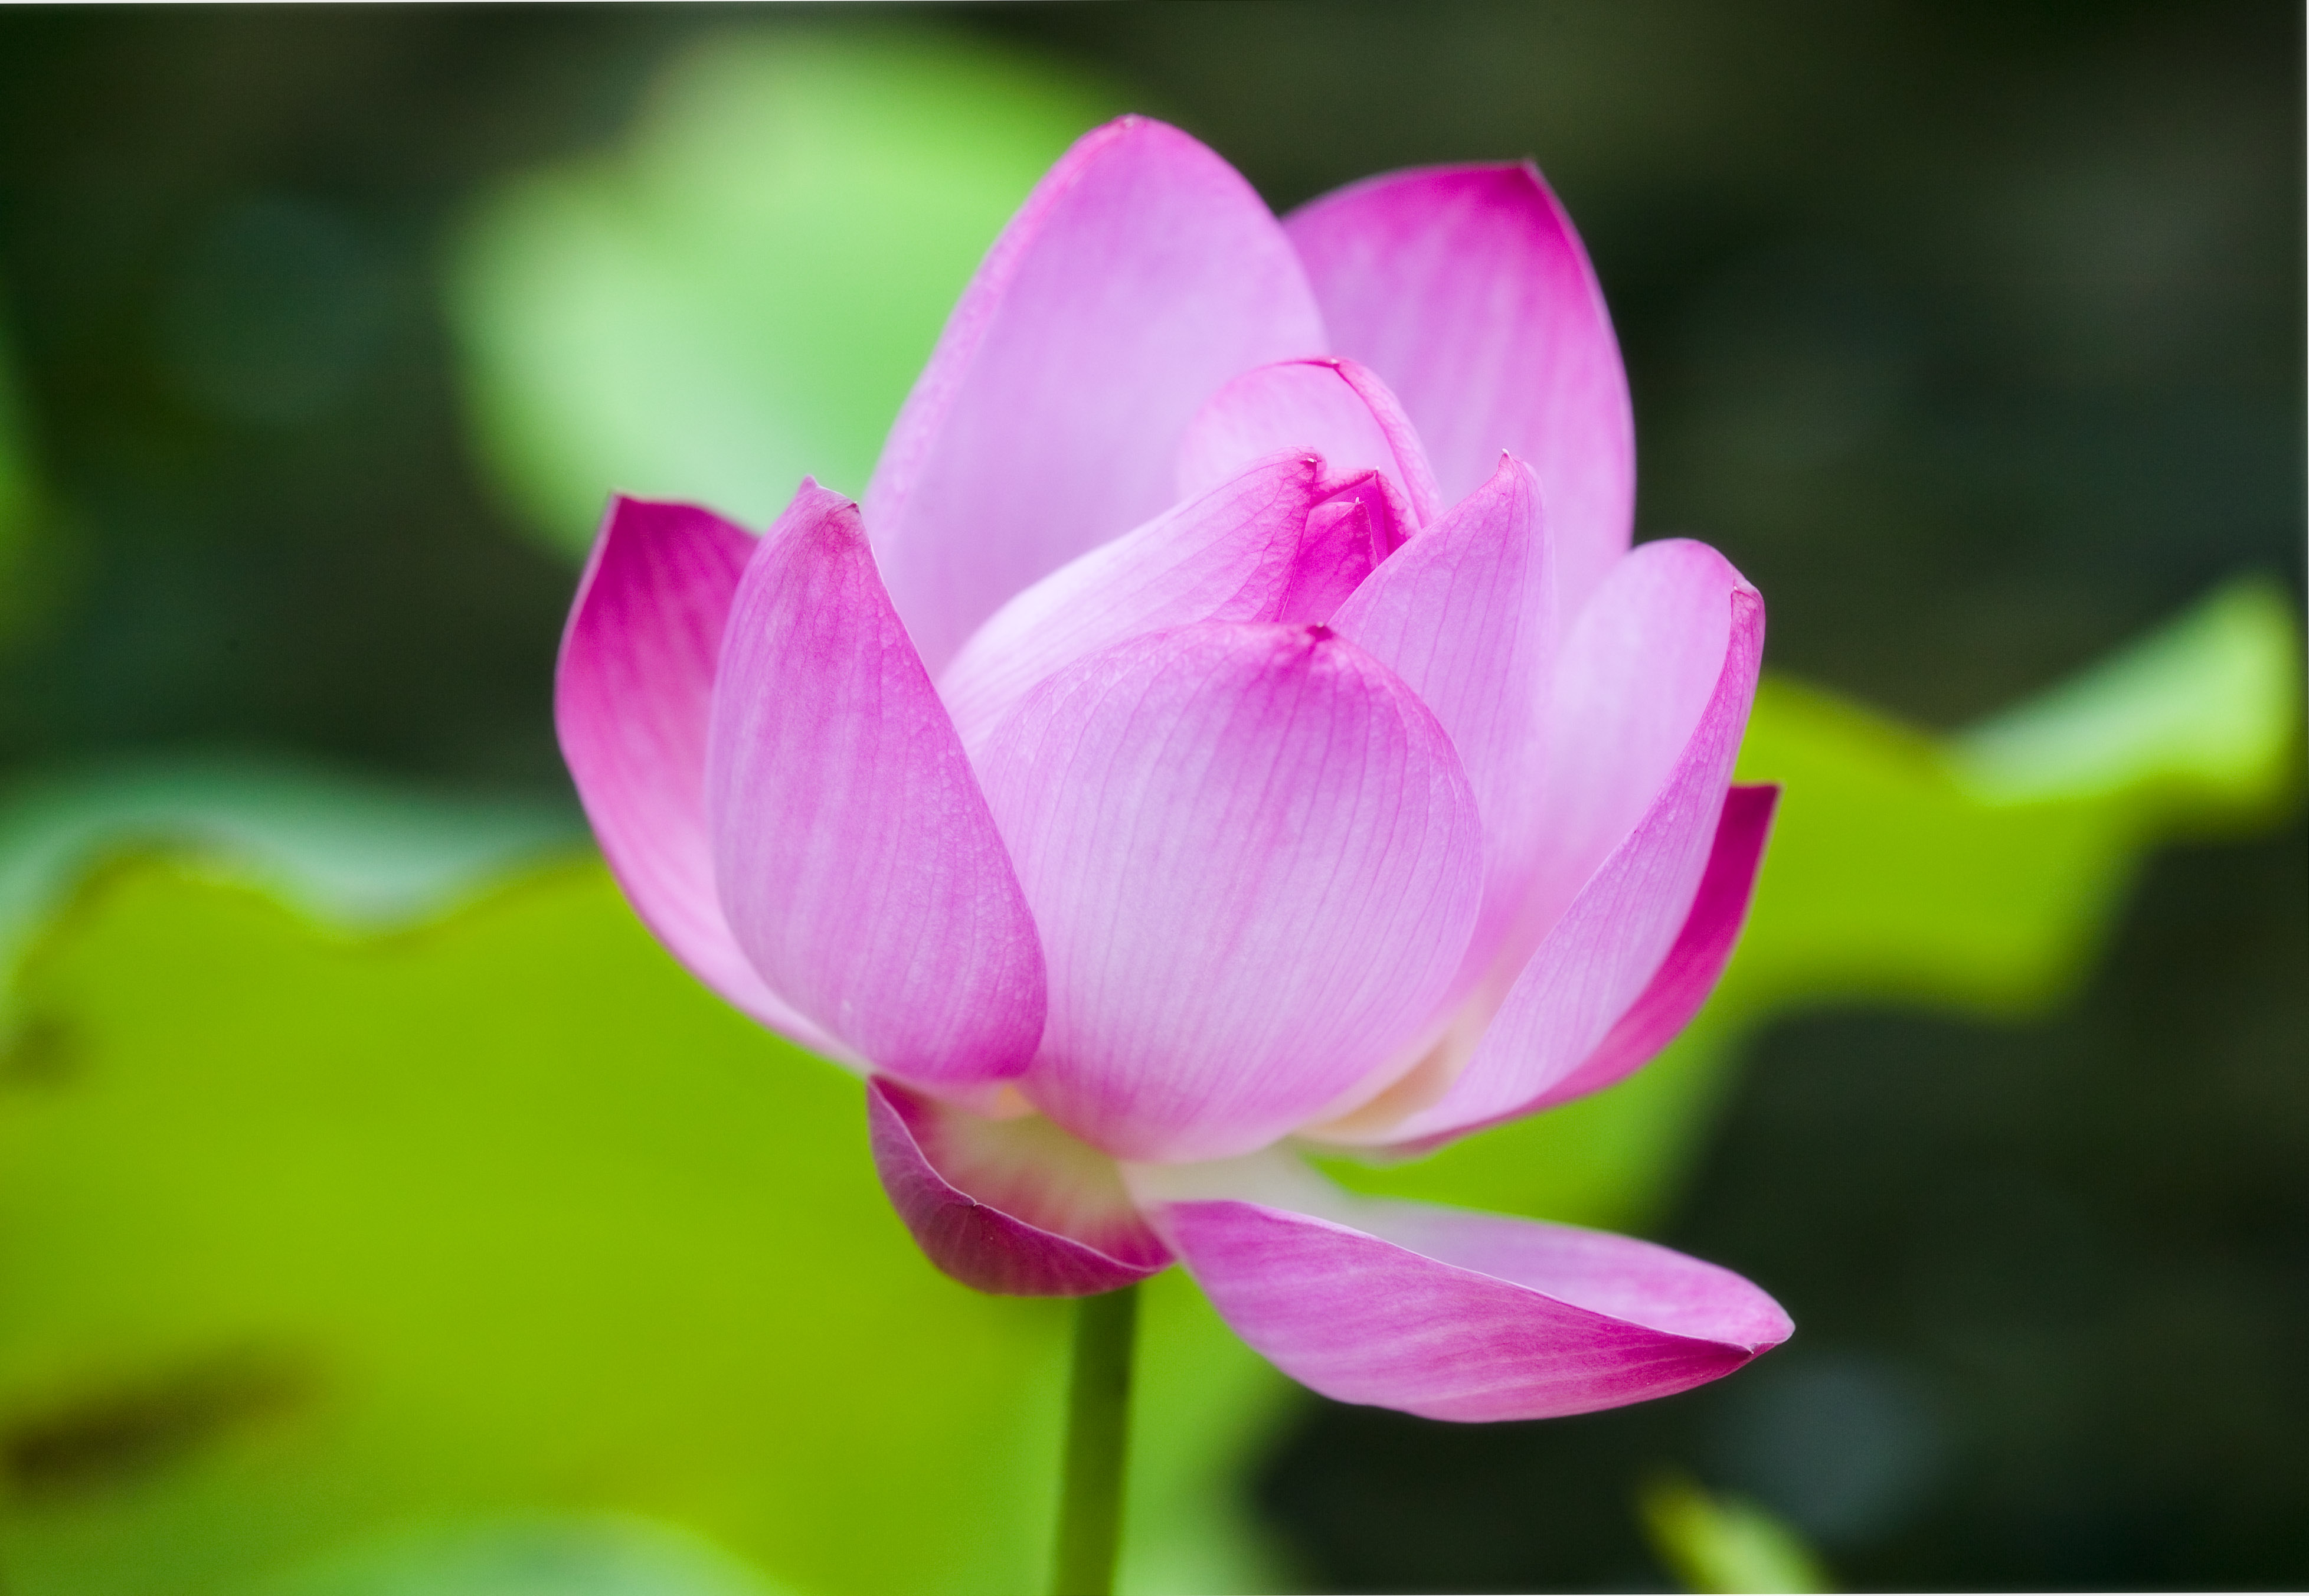 photo,material,free,landscape,picture,stock photo,Creative Commons,A lotus, lotus, , , Pink